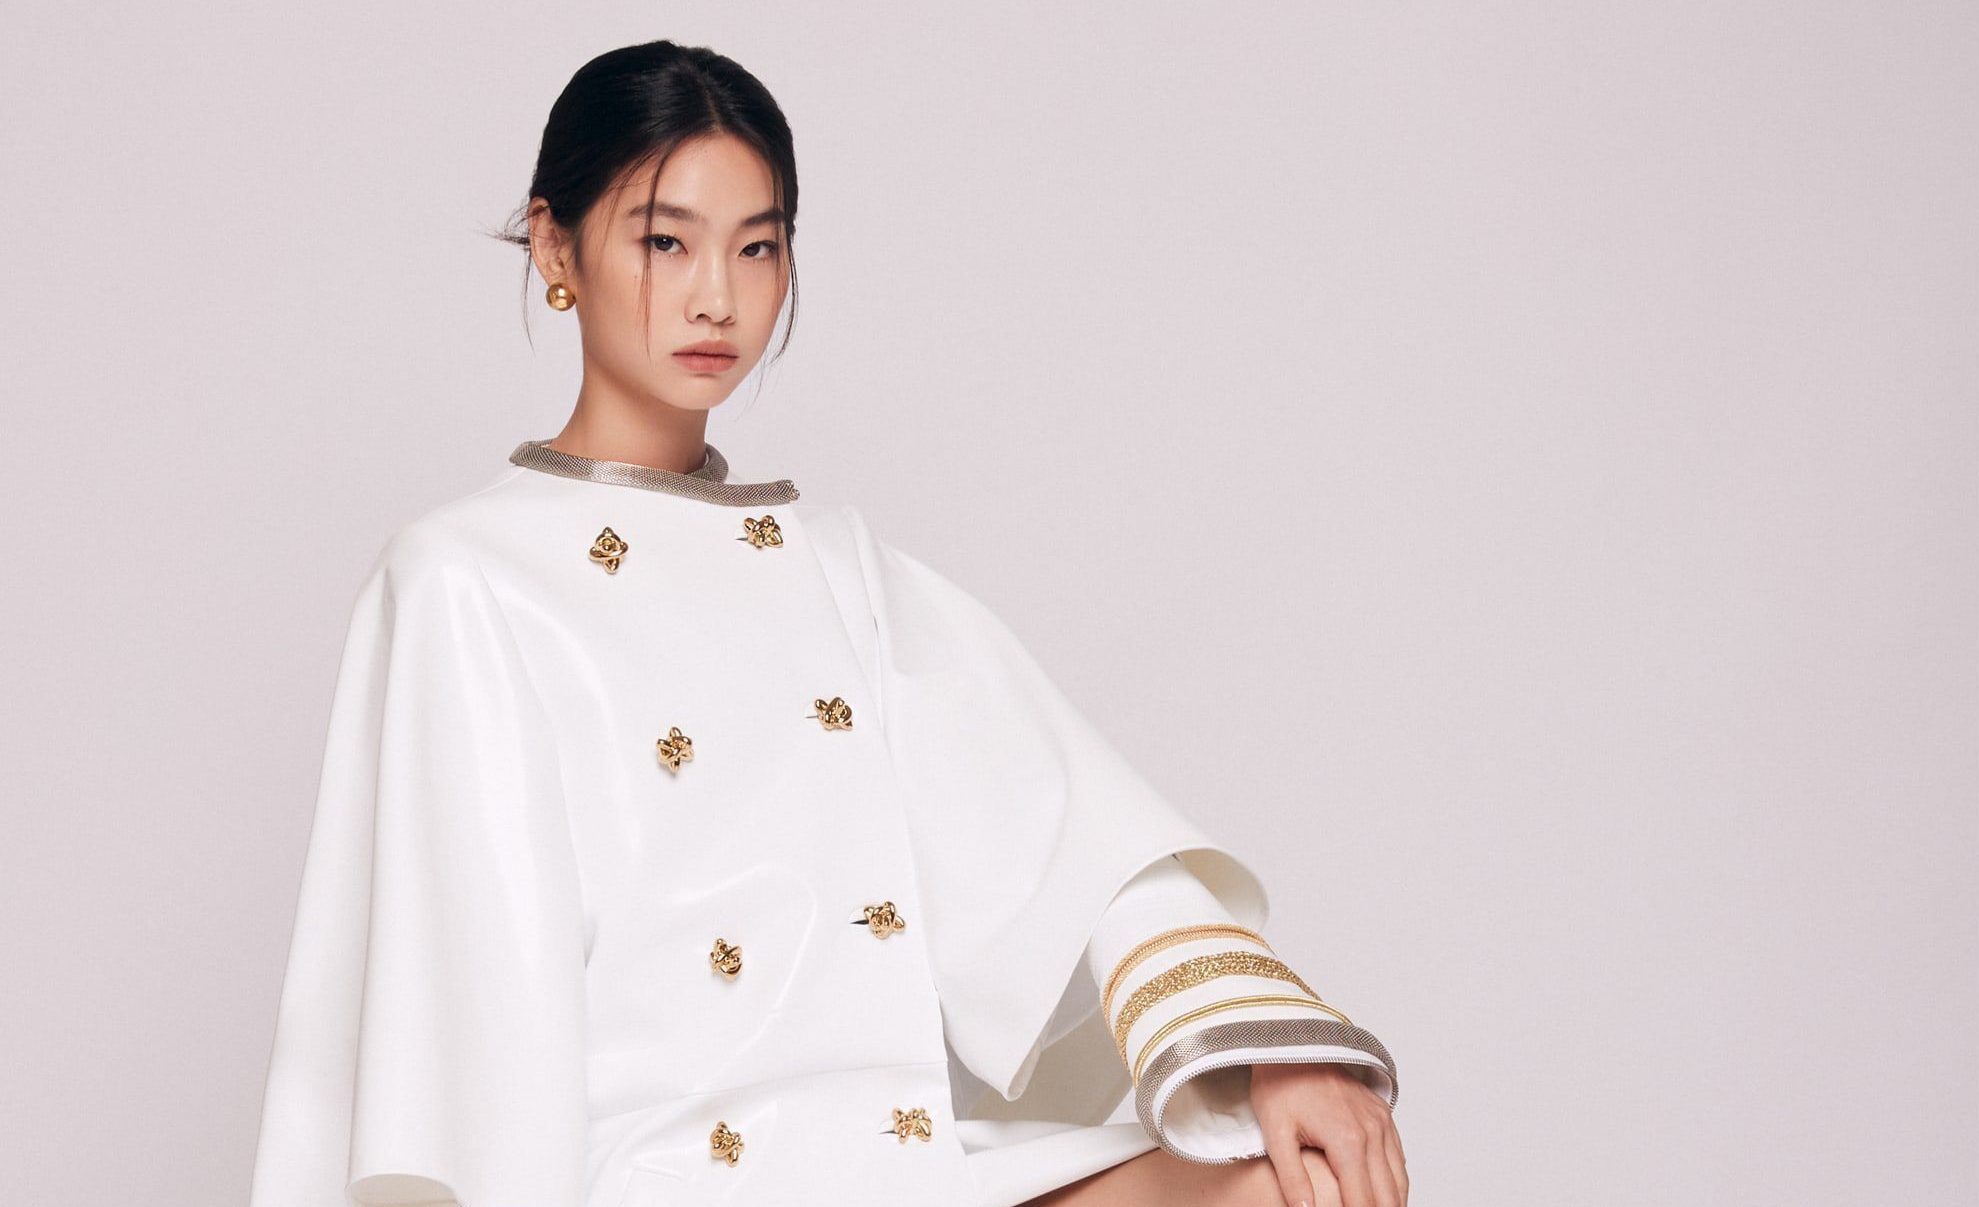 Louis Vuitton Introduces Squid Game Actress Jung Ho-Yeon as its